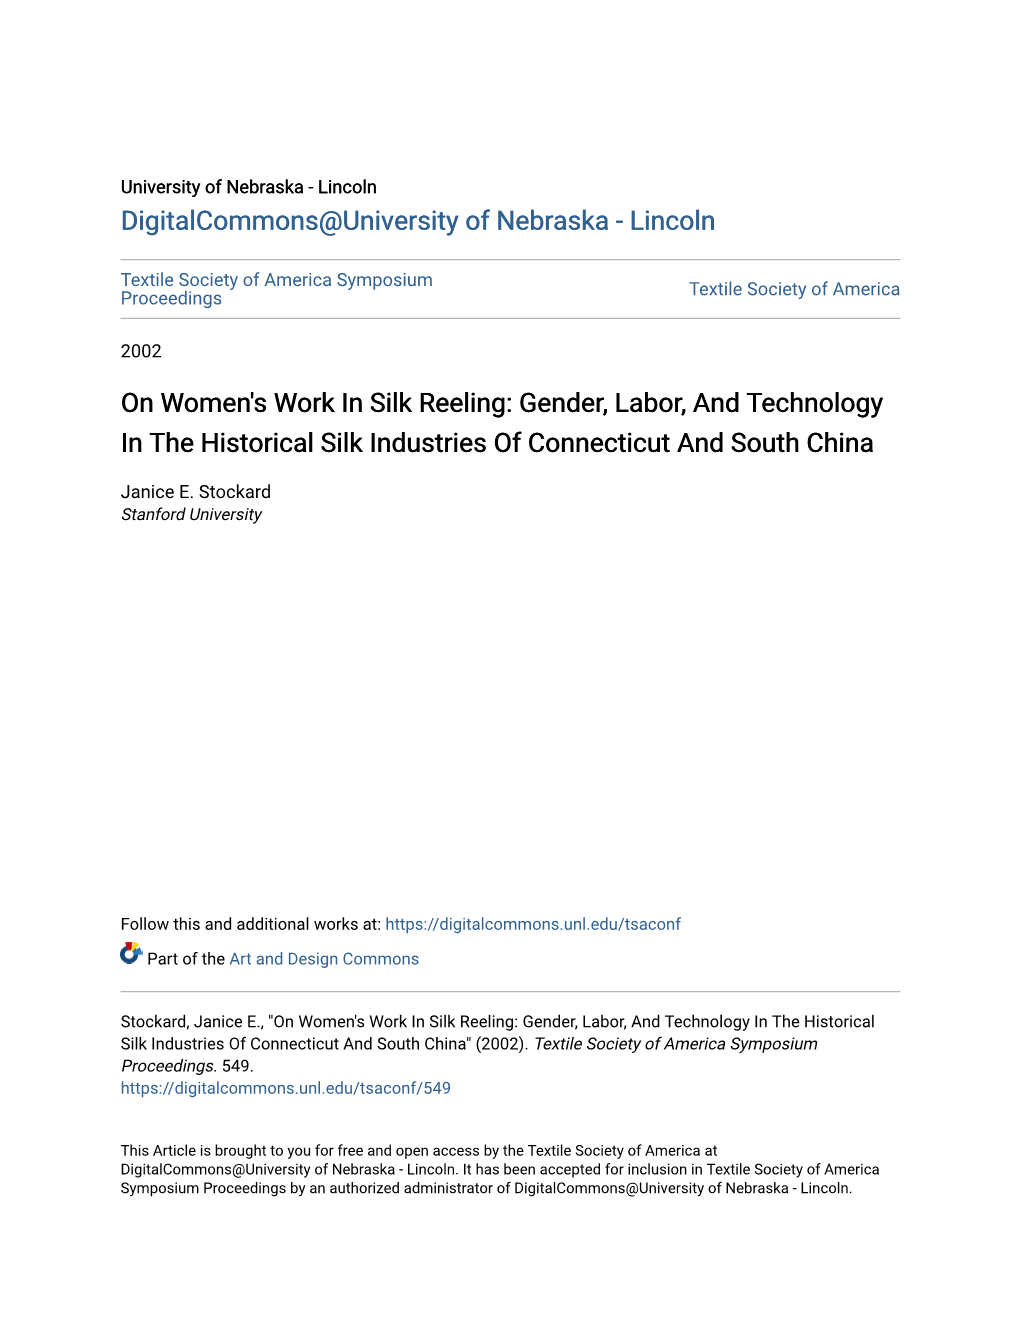 On Women's Work in Silk Reeling: Gender, Labor, and Technology in the Historical Silk Industries of Connecticut and South China